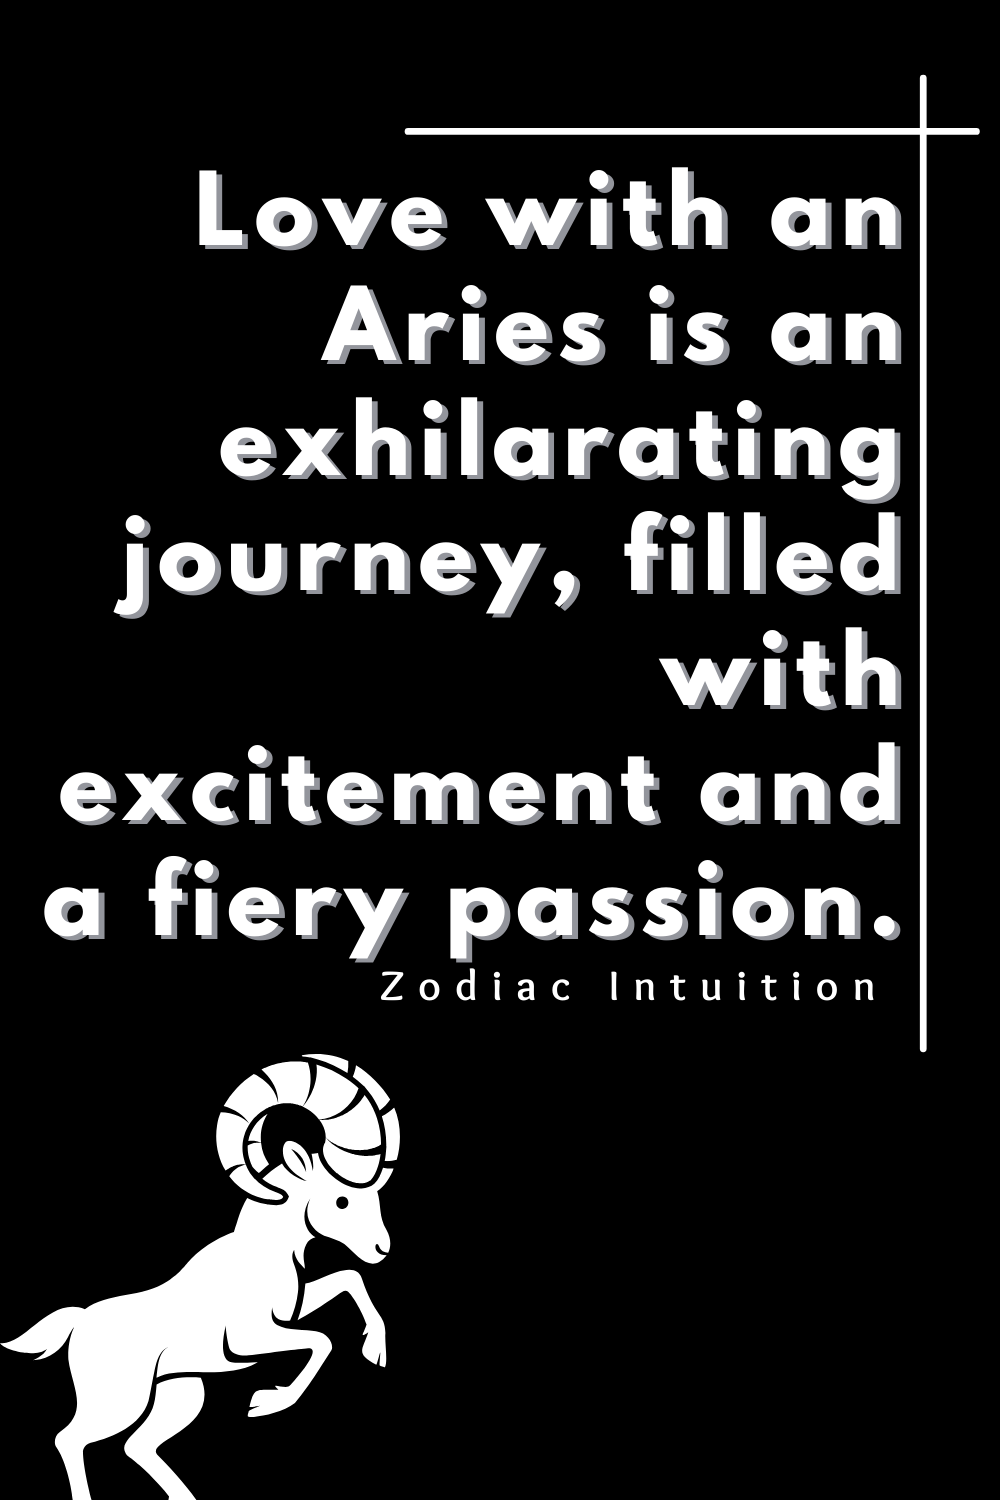 Love with an Aries is an exhilarating journey, filled with excitement and a fiery passion.